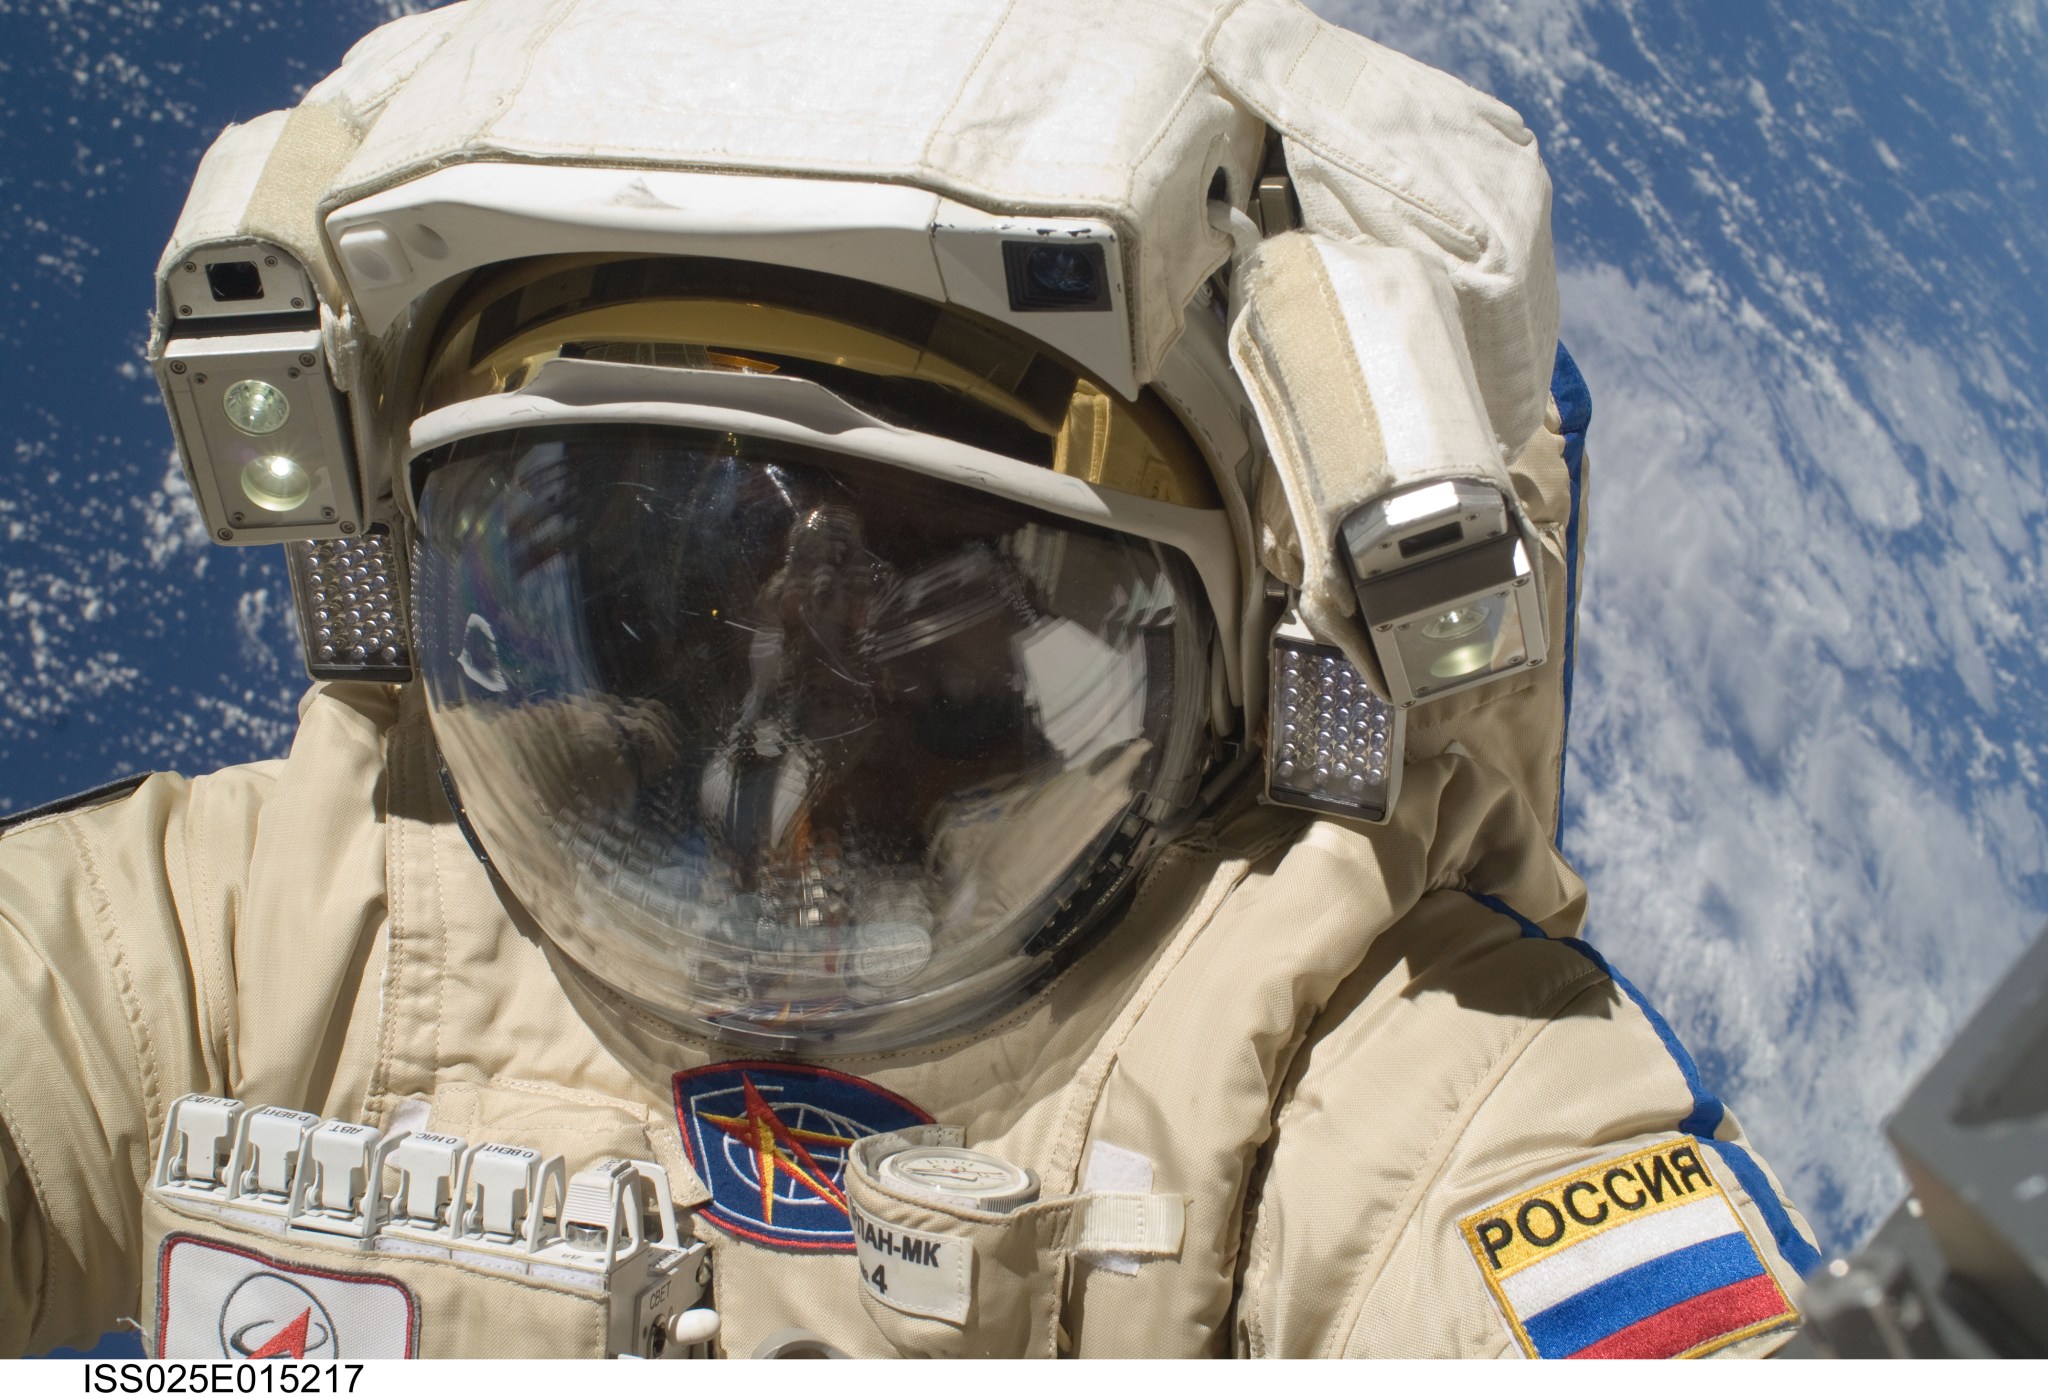 Cosmonaut Oleg Skripochka conducts a spacewalk to install and relocate hardware on the International Space Station.